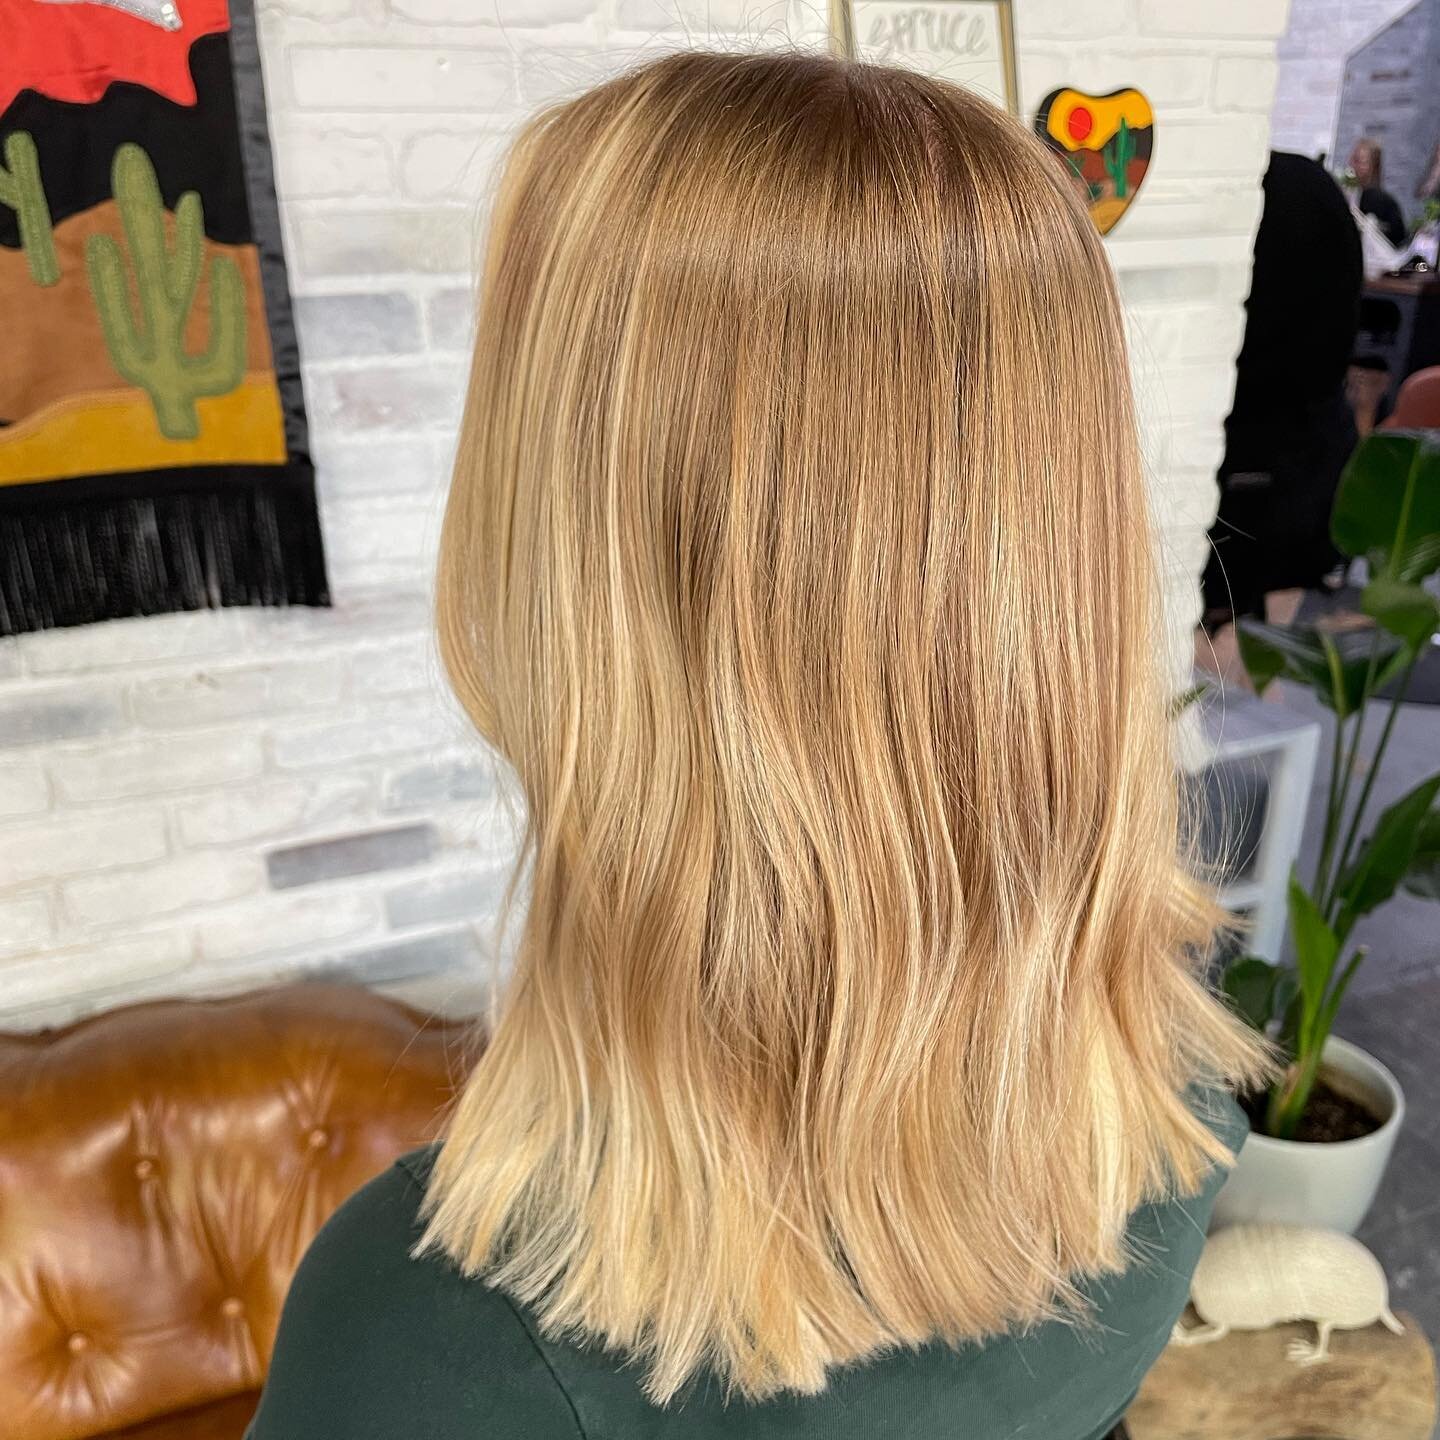 It&rsquo;s been a busy week! Happy graduation day UNL and everyone else this month! 🎉blonding/balayage by @enpsullivan #sprucehairco #blonde #balayage #unl #downtownlincoln #lincolnnebraska #lnk #lincolnhairstylist #nebraksahairstylist #elevenaustra